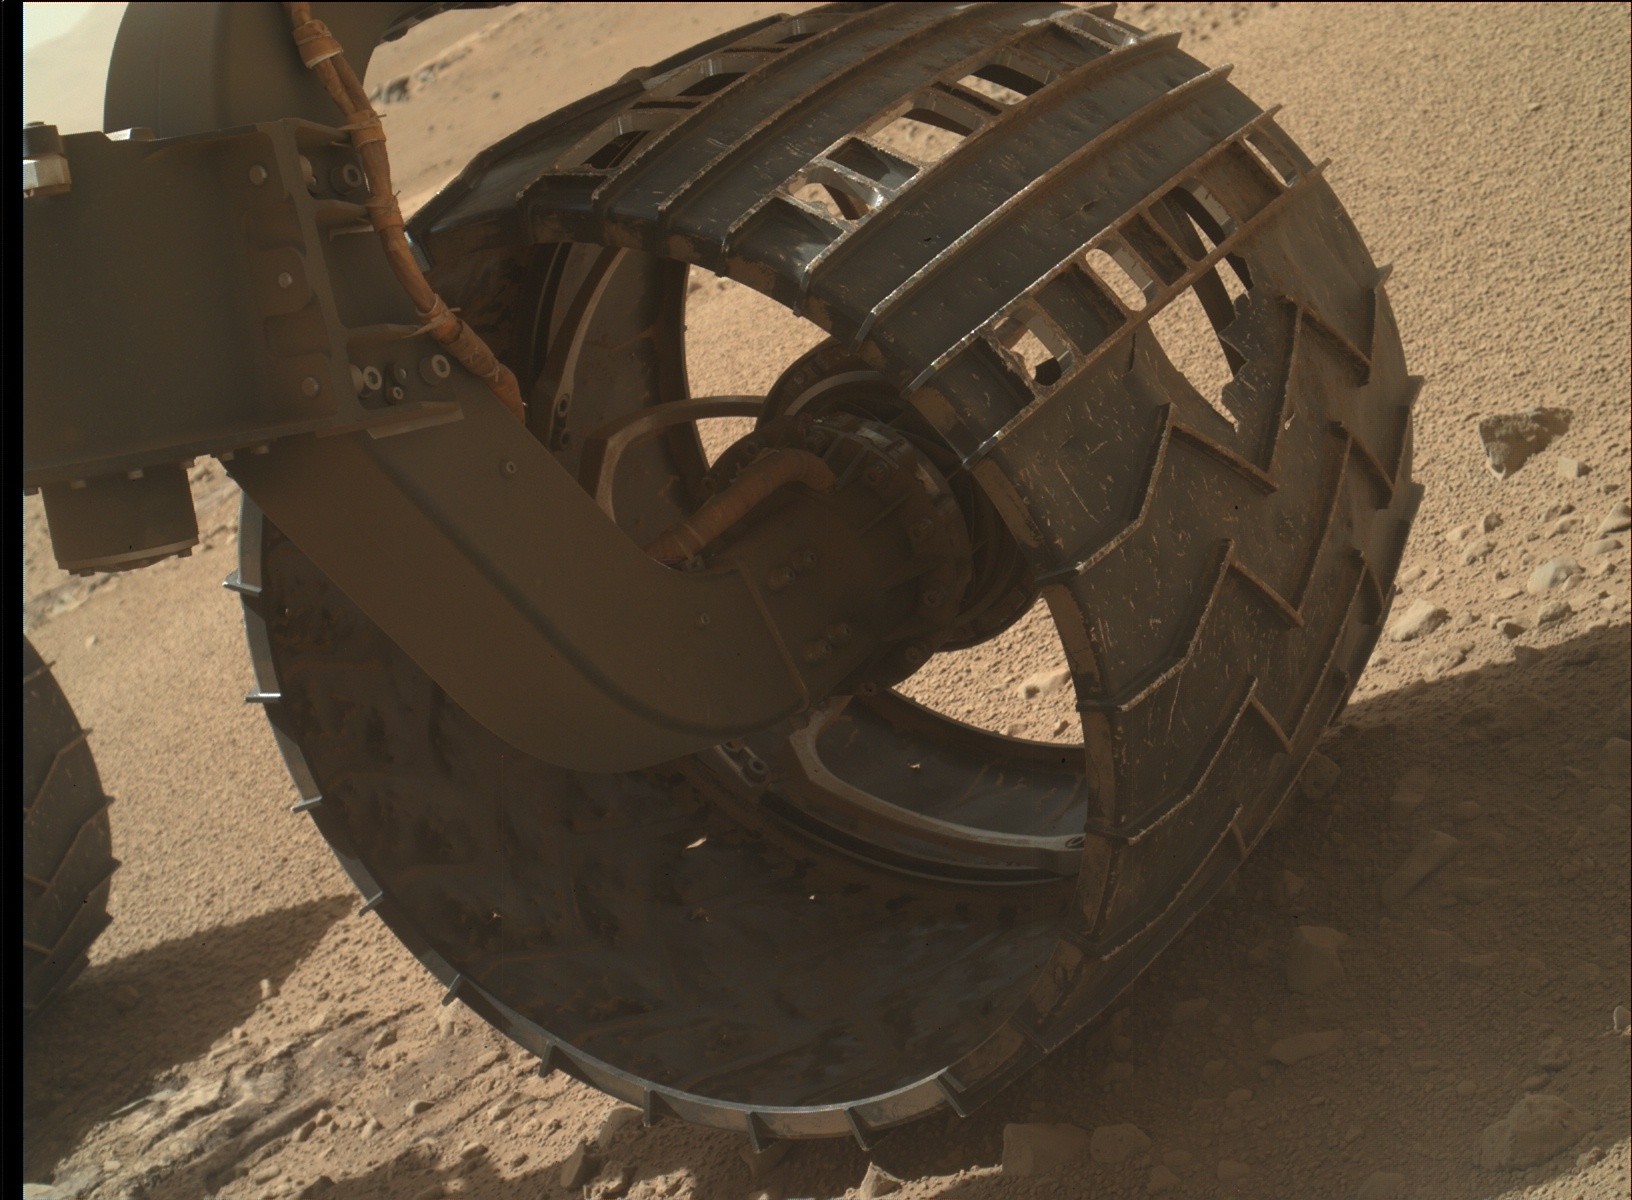 Nasa's Mars rover Curiosity acquired this image using its Mars Hand Lens Imager (MAHLI) on Sol 552